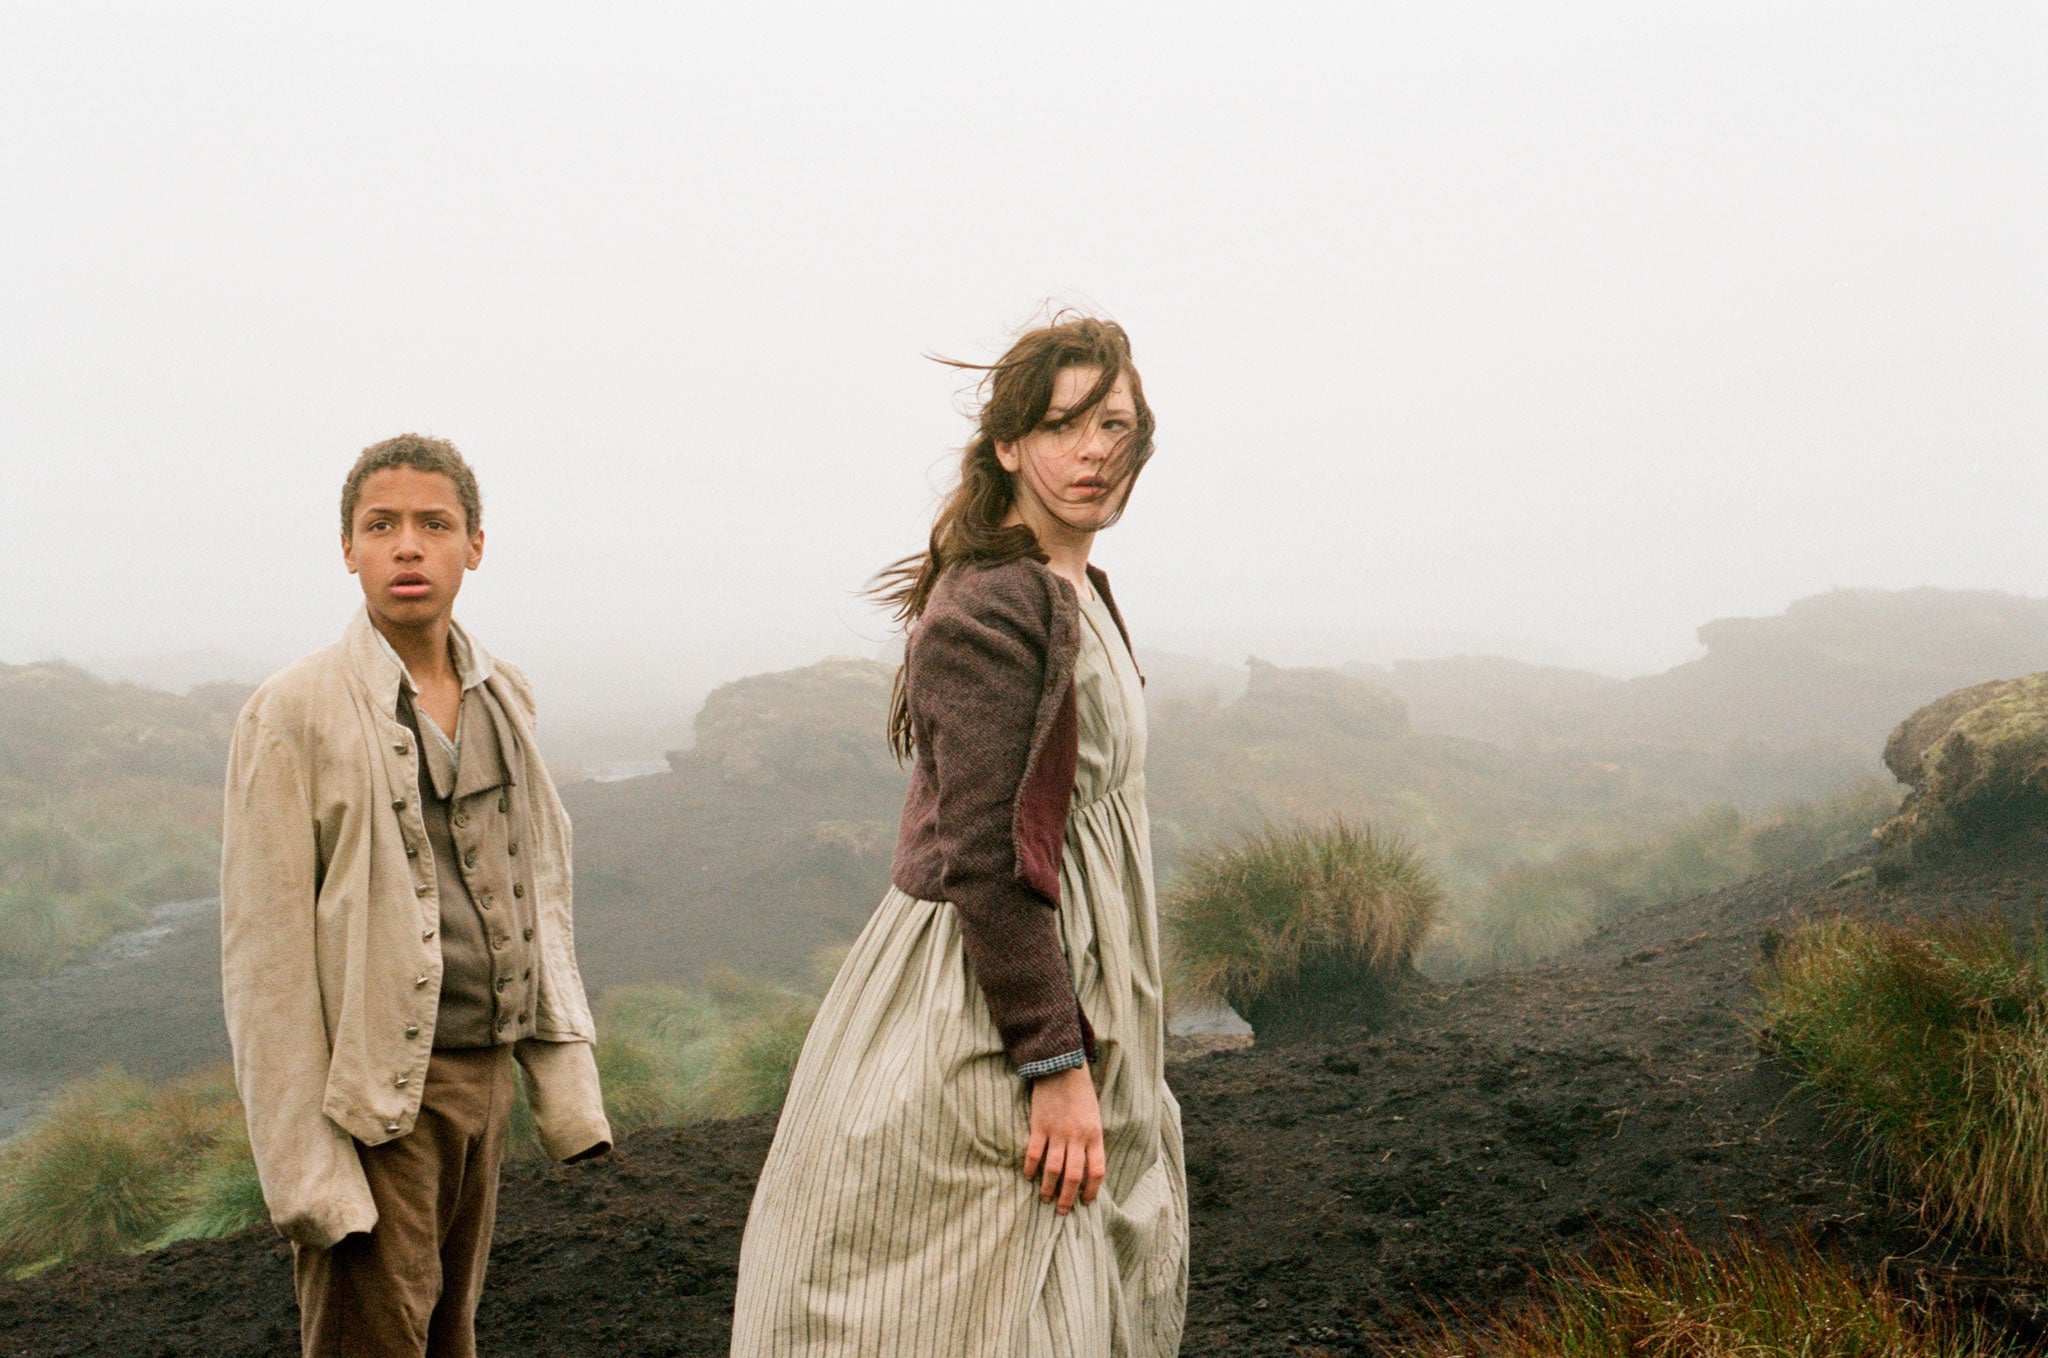 Origins, belonging, and exclusion: Andrea Arnold's adaptation of 'Wuthering Heights'